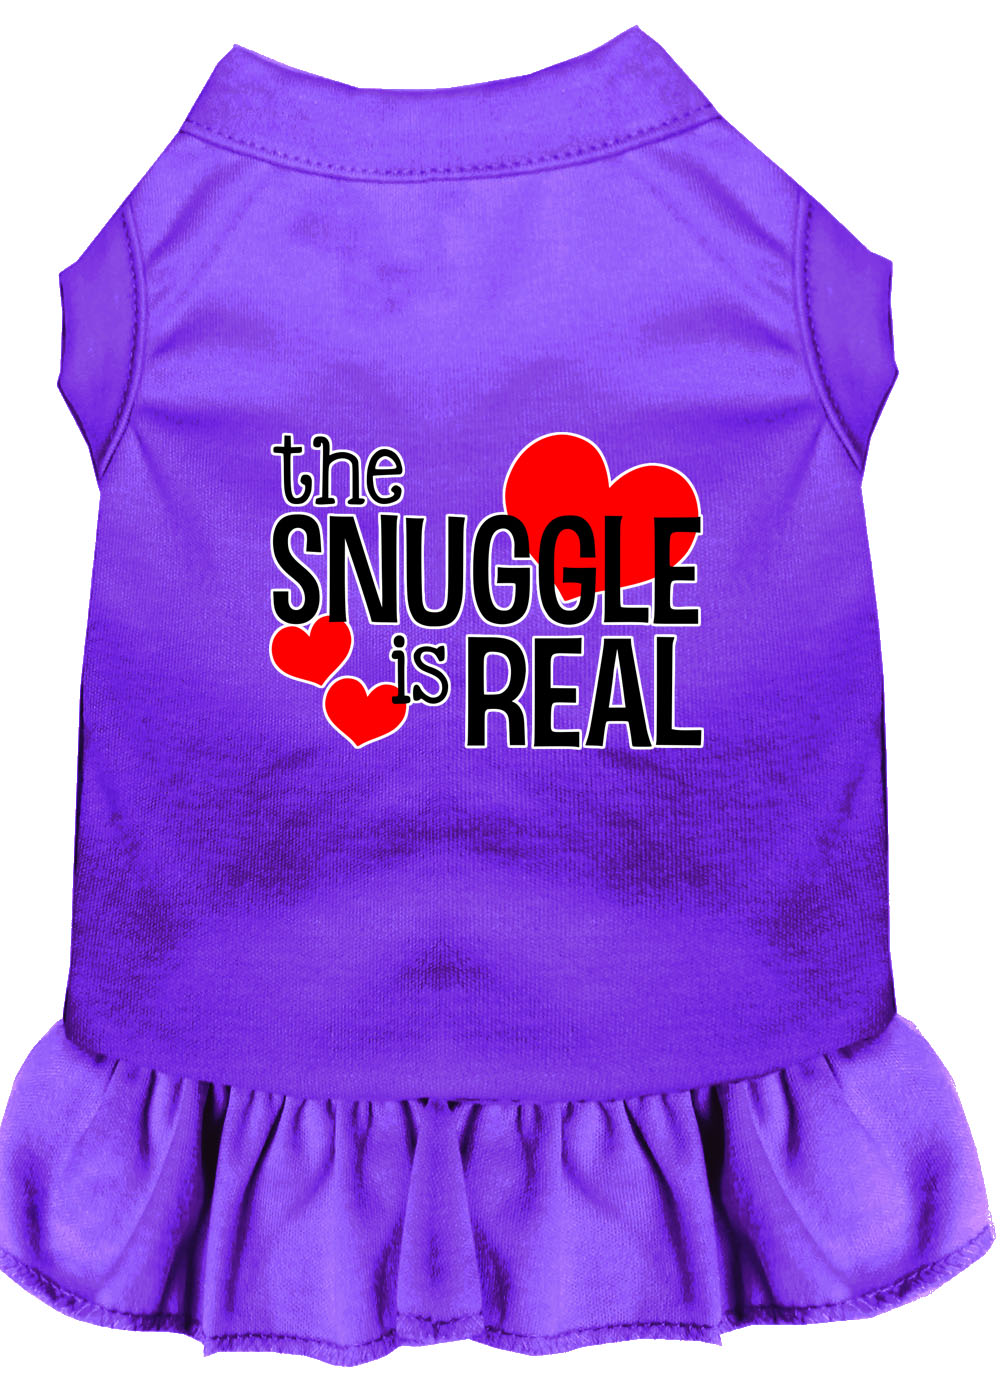 The Snuggle is Real Screen Print Dog Dress Purple Med